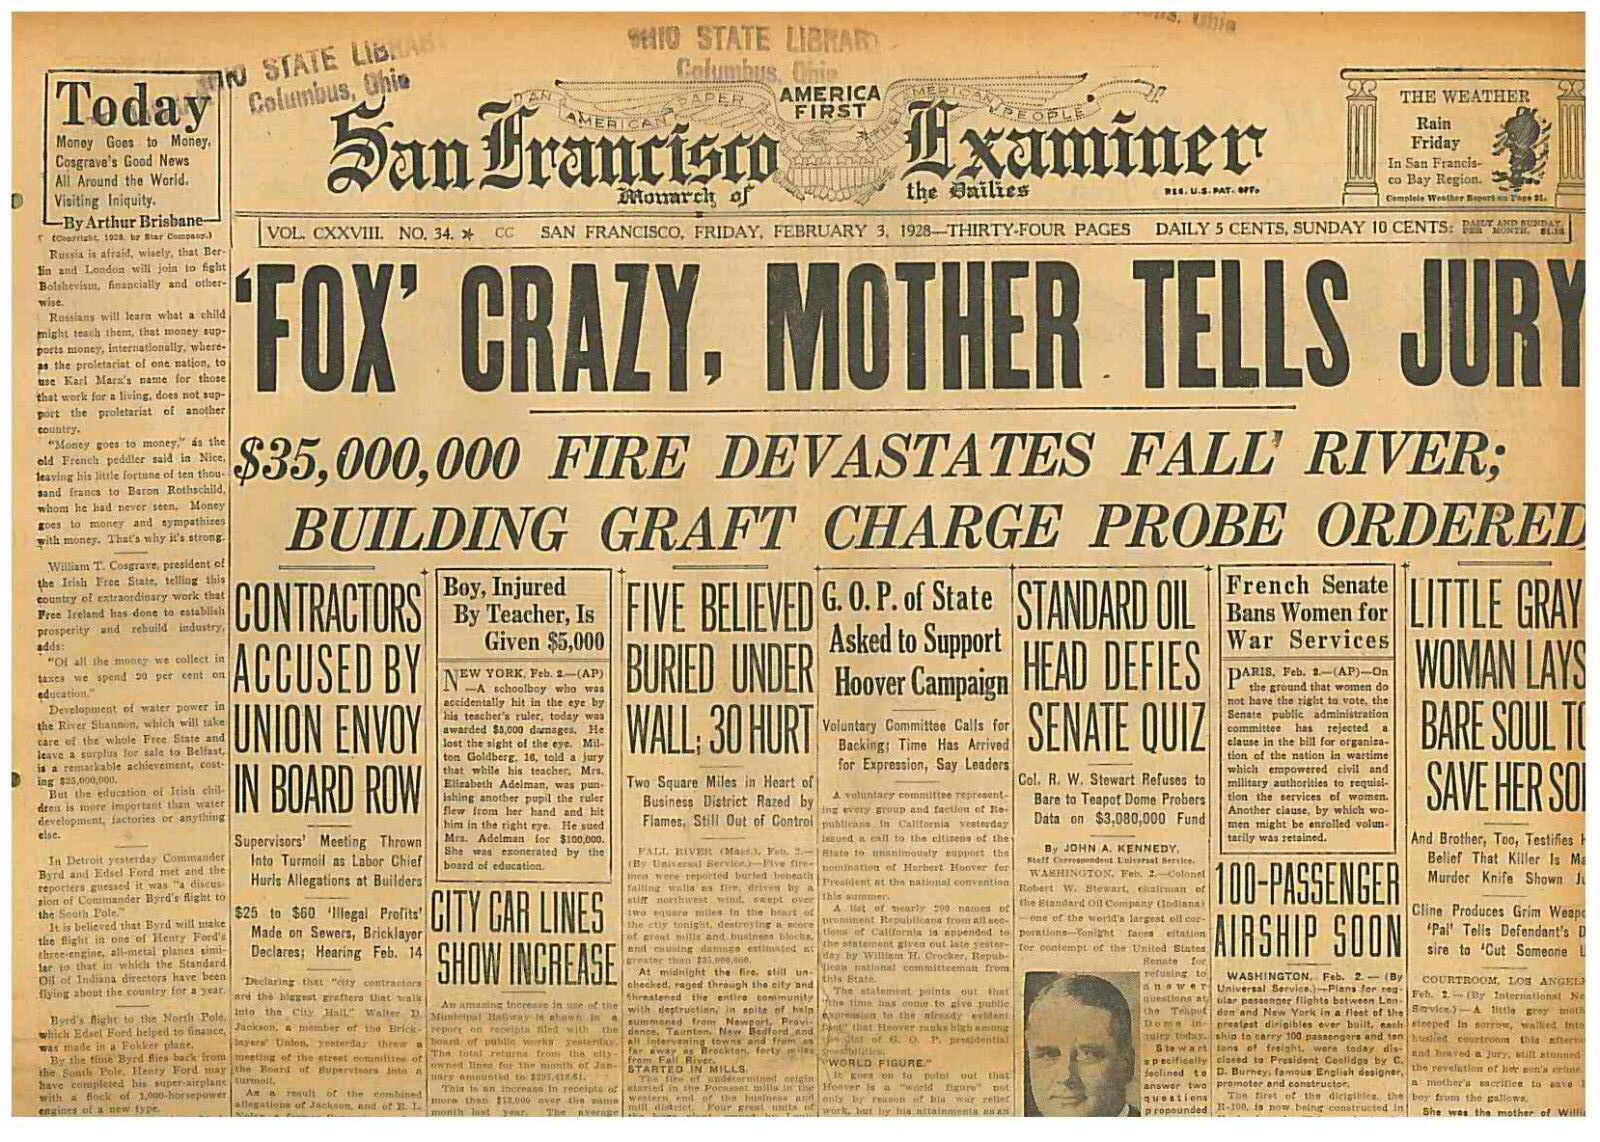  HICKMAN MOTHER TELLS JURY SON IS CRAZY 1928 HISTORIC CRIME NEWSPAPER 0302143WQ